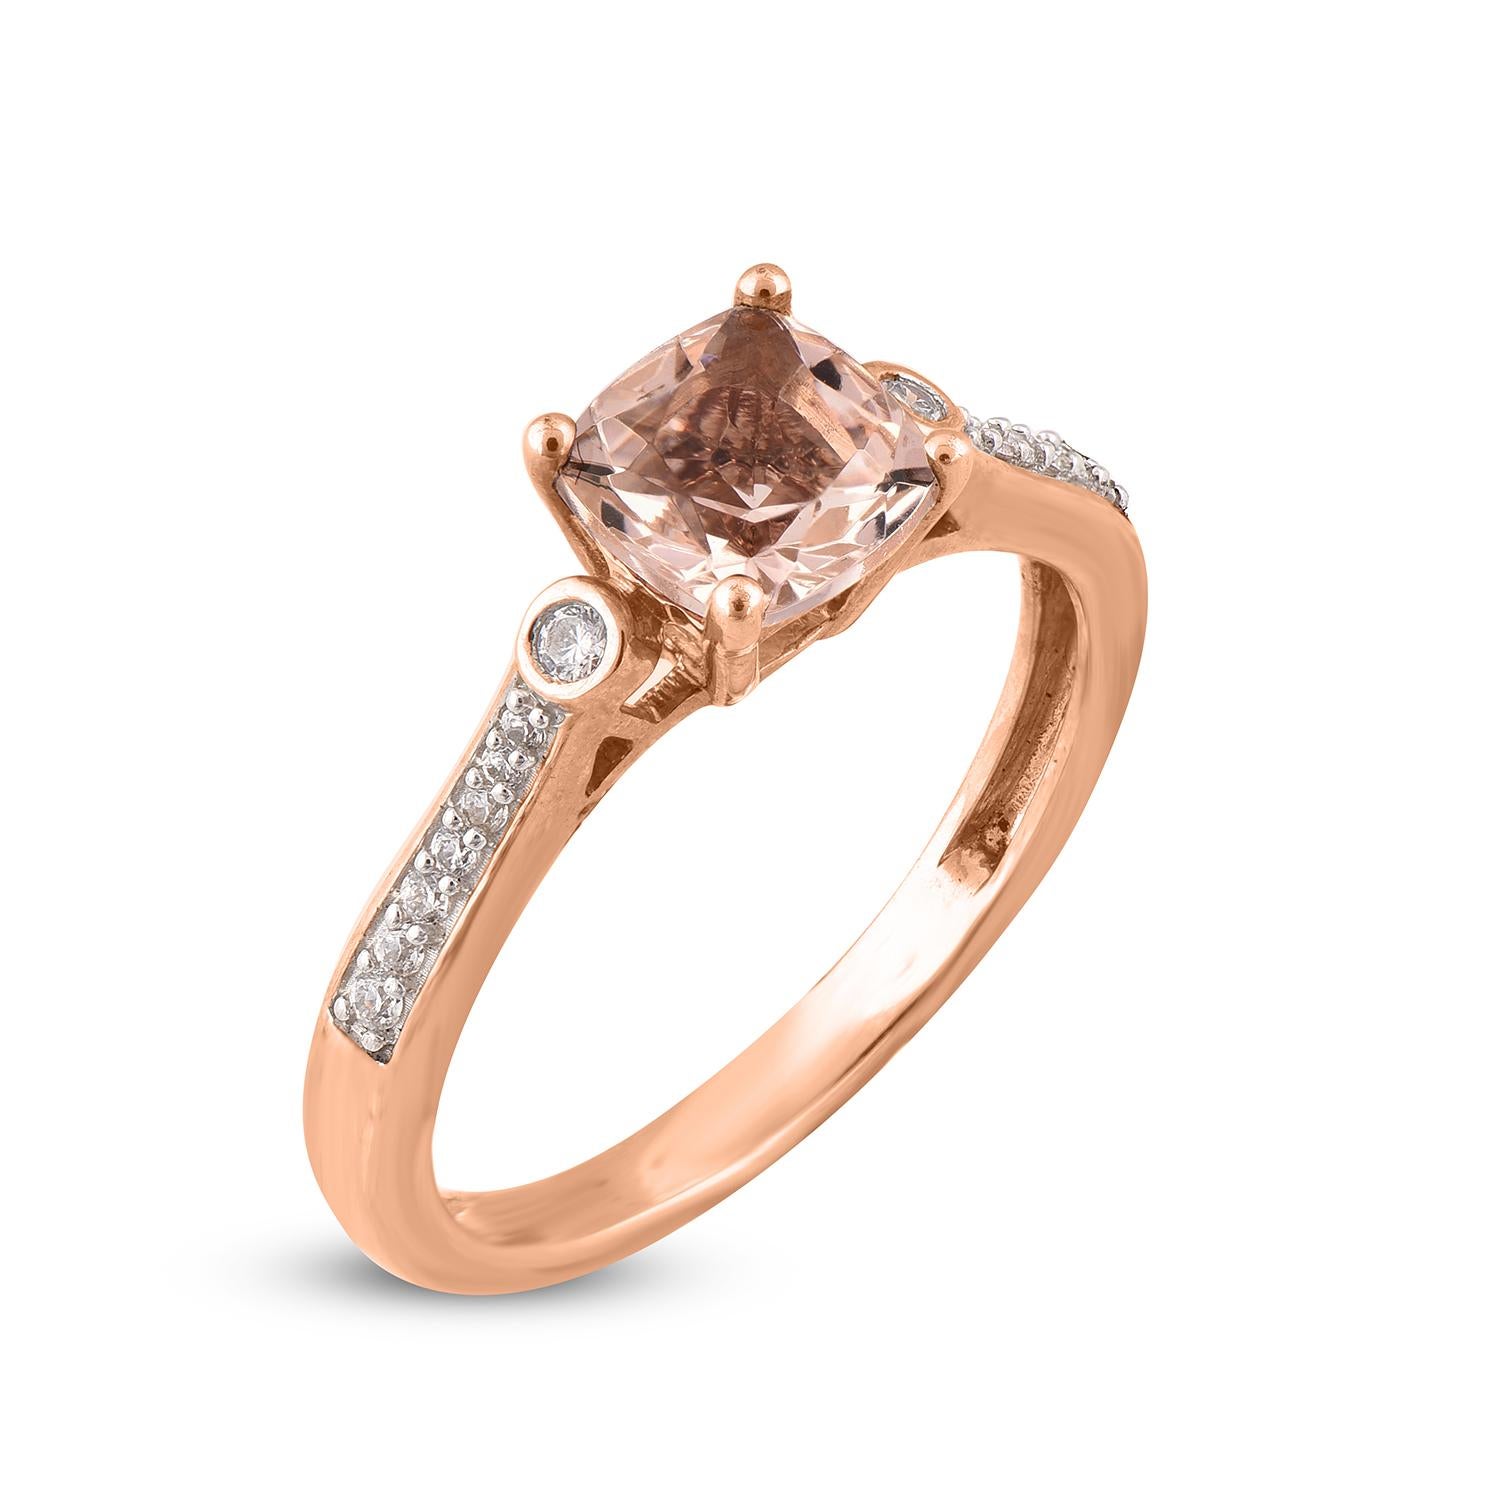 Breathtaking diamond and gemstone studded engagement ring that is ready to make you shine. Designed to perfection in 14 karat rose gold and glitters beautifully with 16 round white diamonds and 1 cushion shape morganite embellished in prong, pave